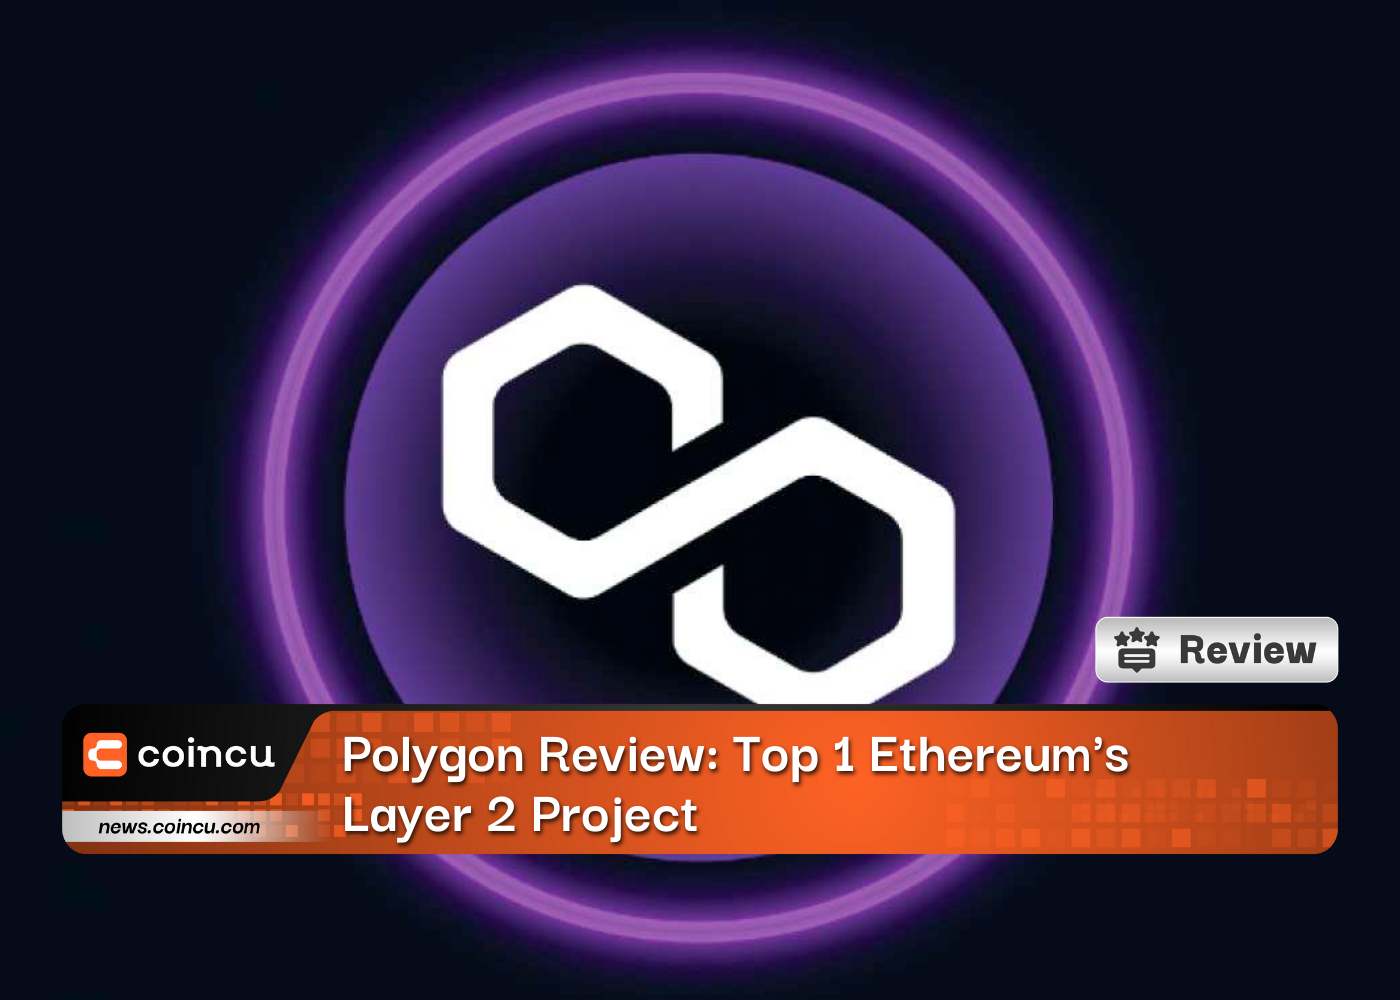 Polygon Review: Top 1 Ethereum's Layer 2 Project